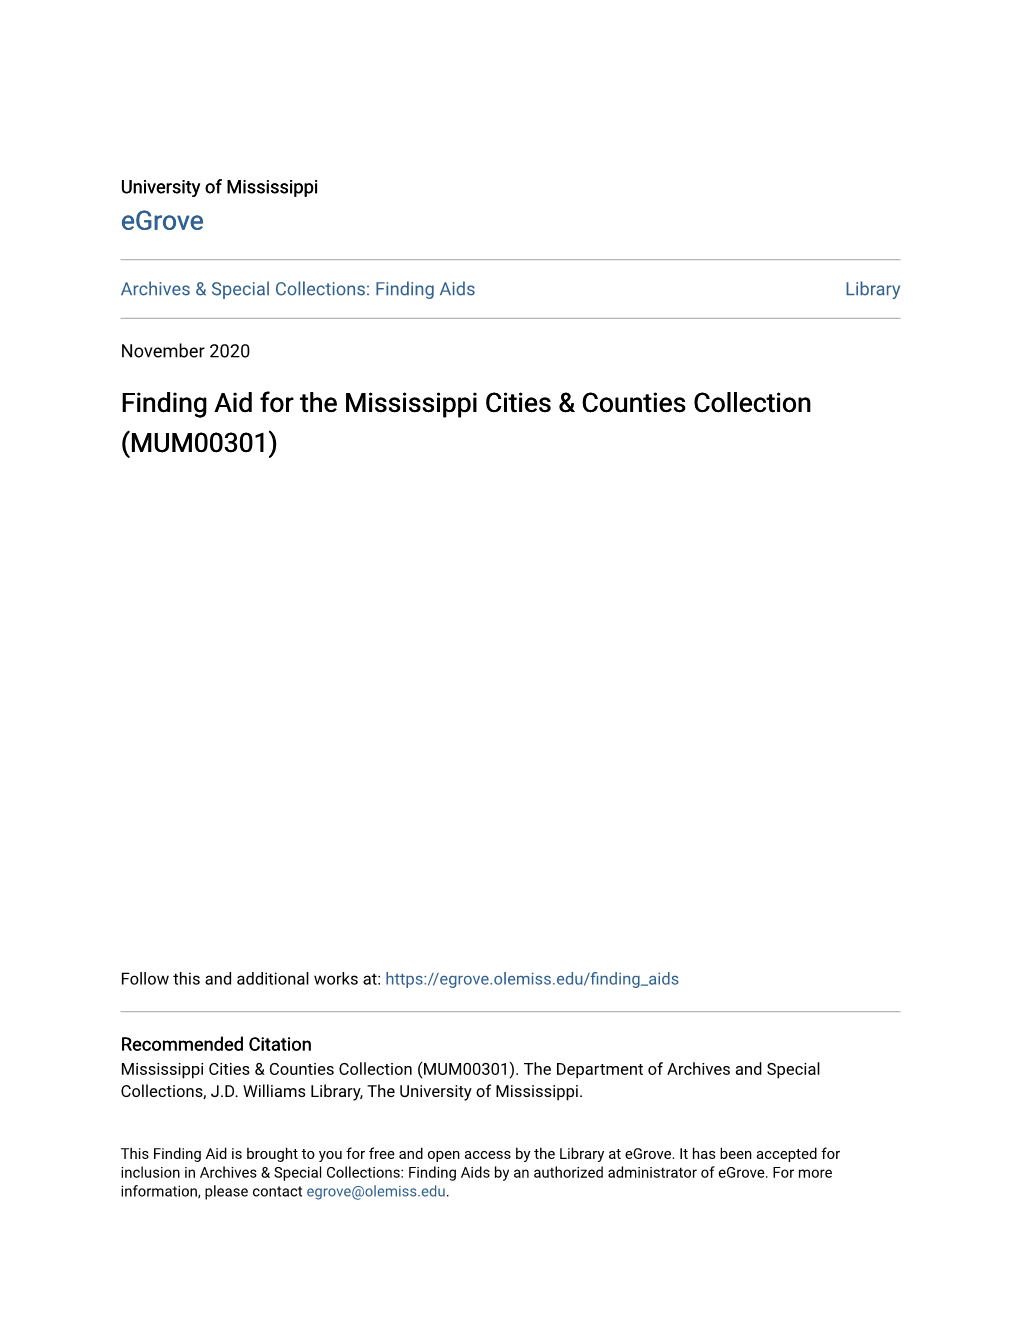 Finding Aid for the Mississippi Cities & Counties Collection